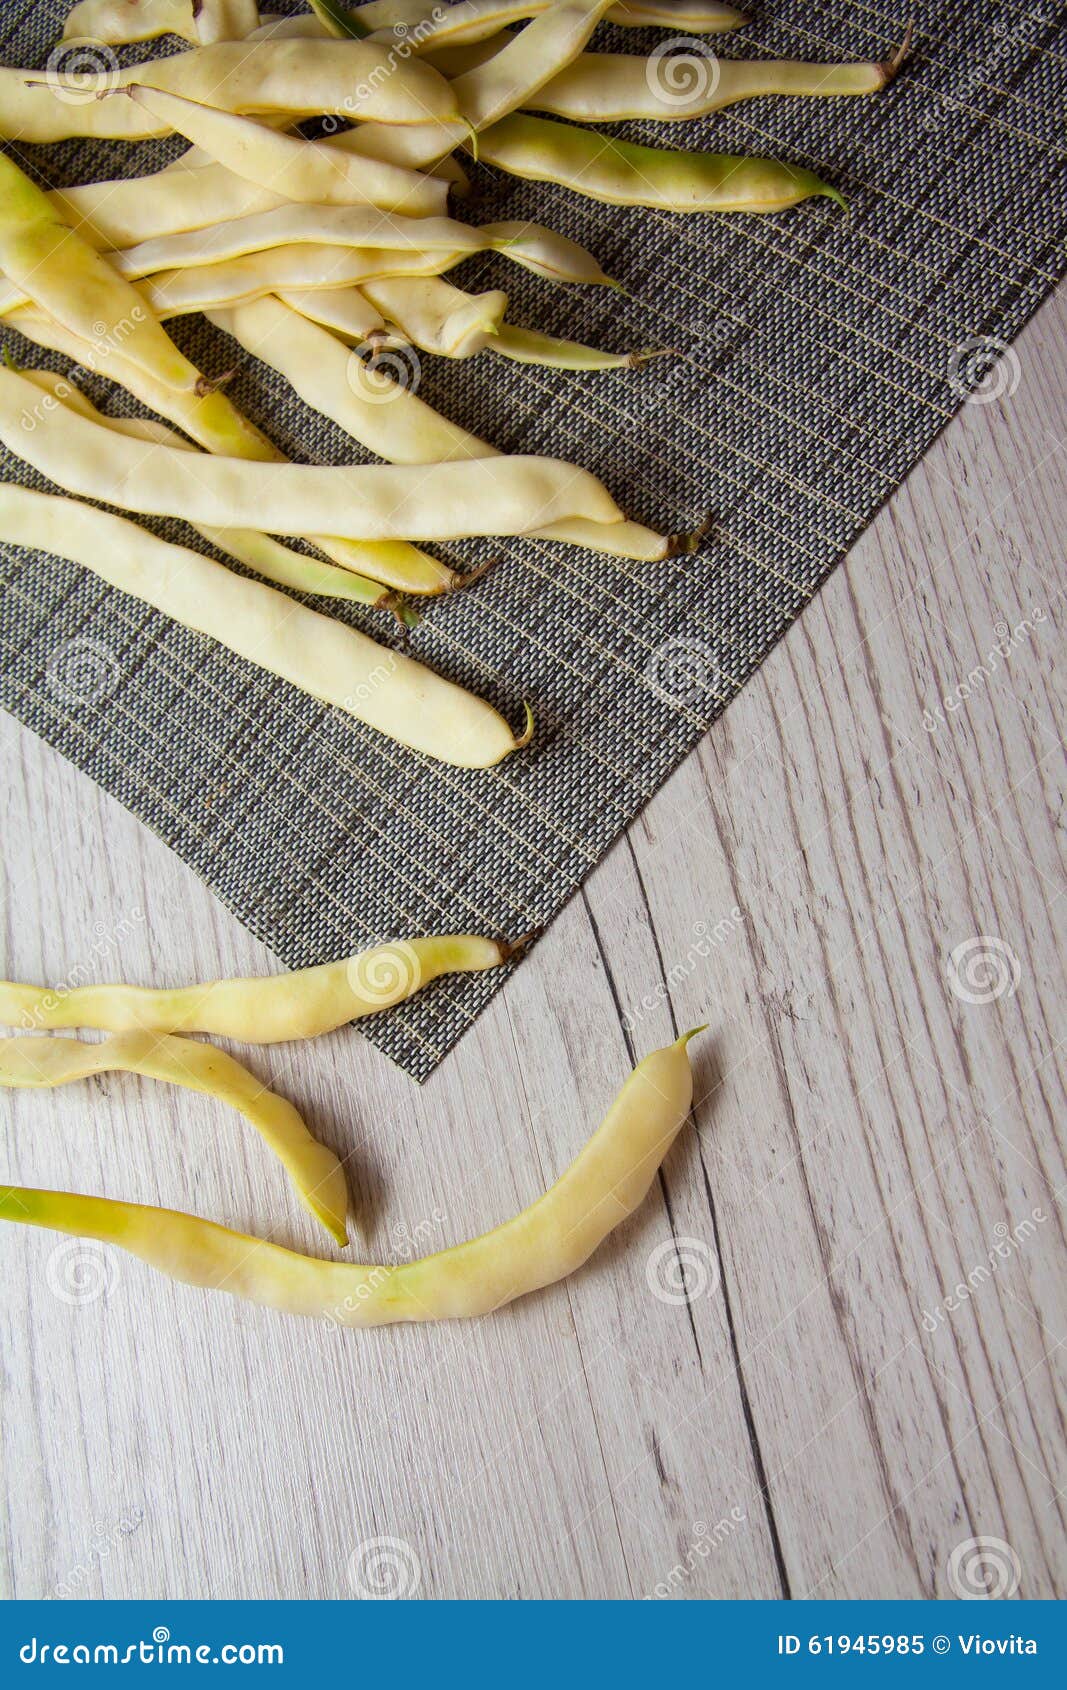 Yellow Beans Green Source Protein 61945985 